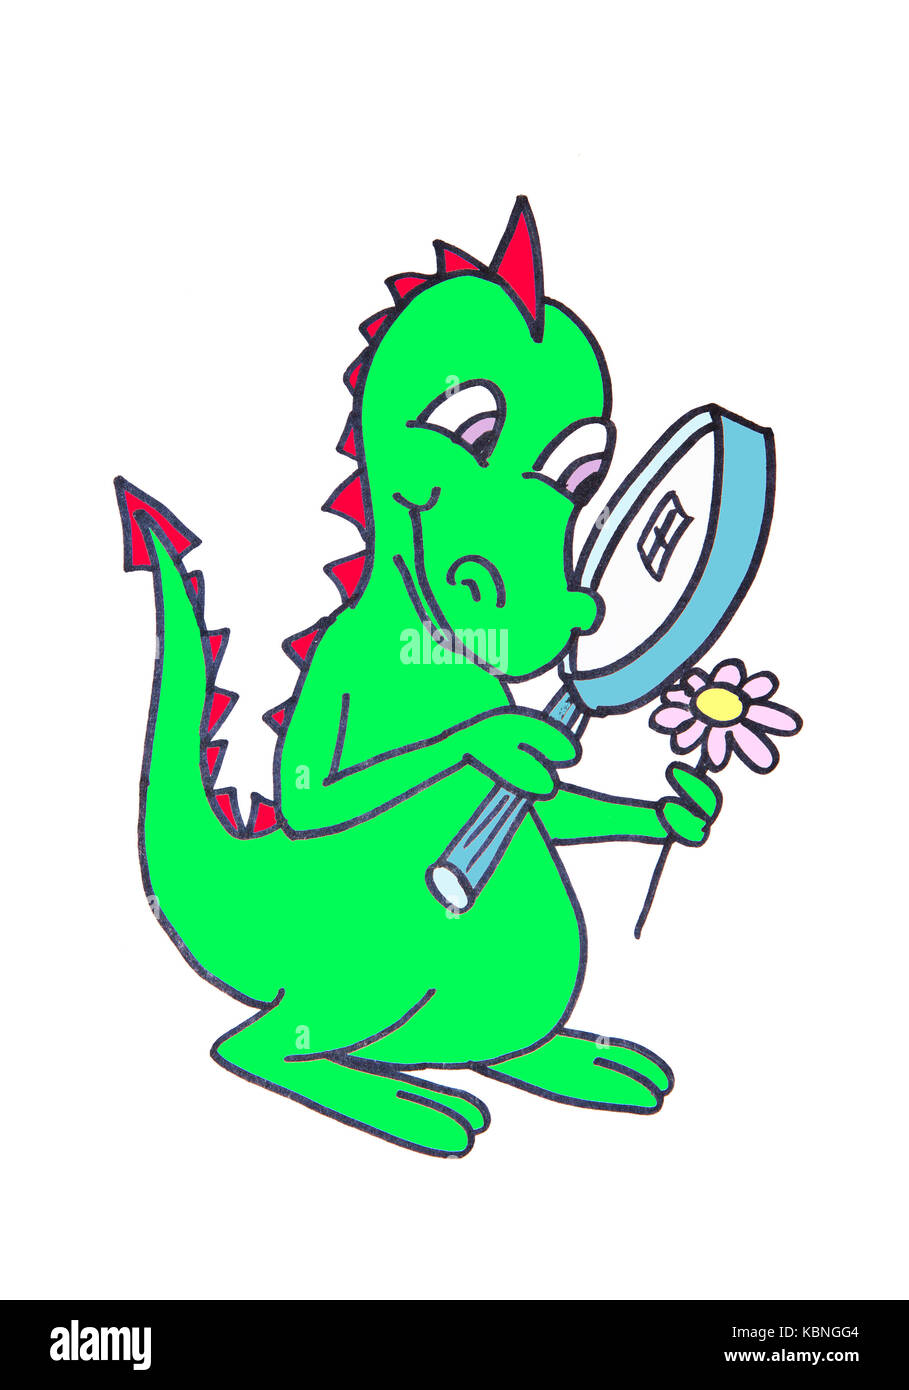 Baby dragon looking a flower through a magnifying glass. Illustration. Stock Photo